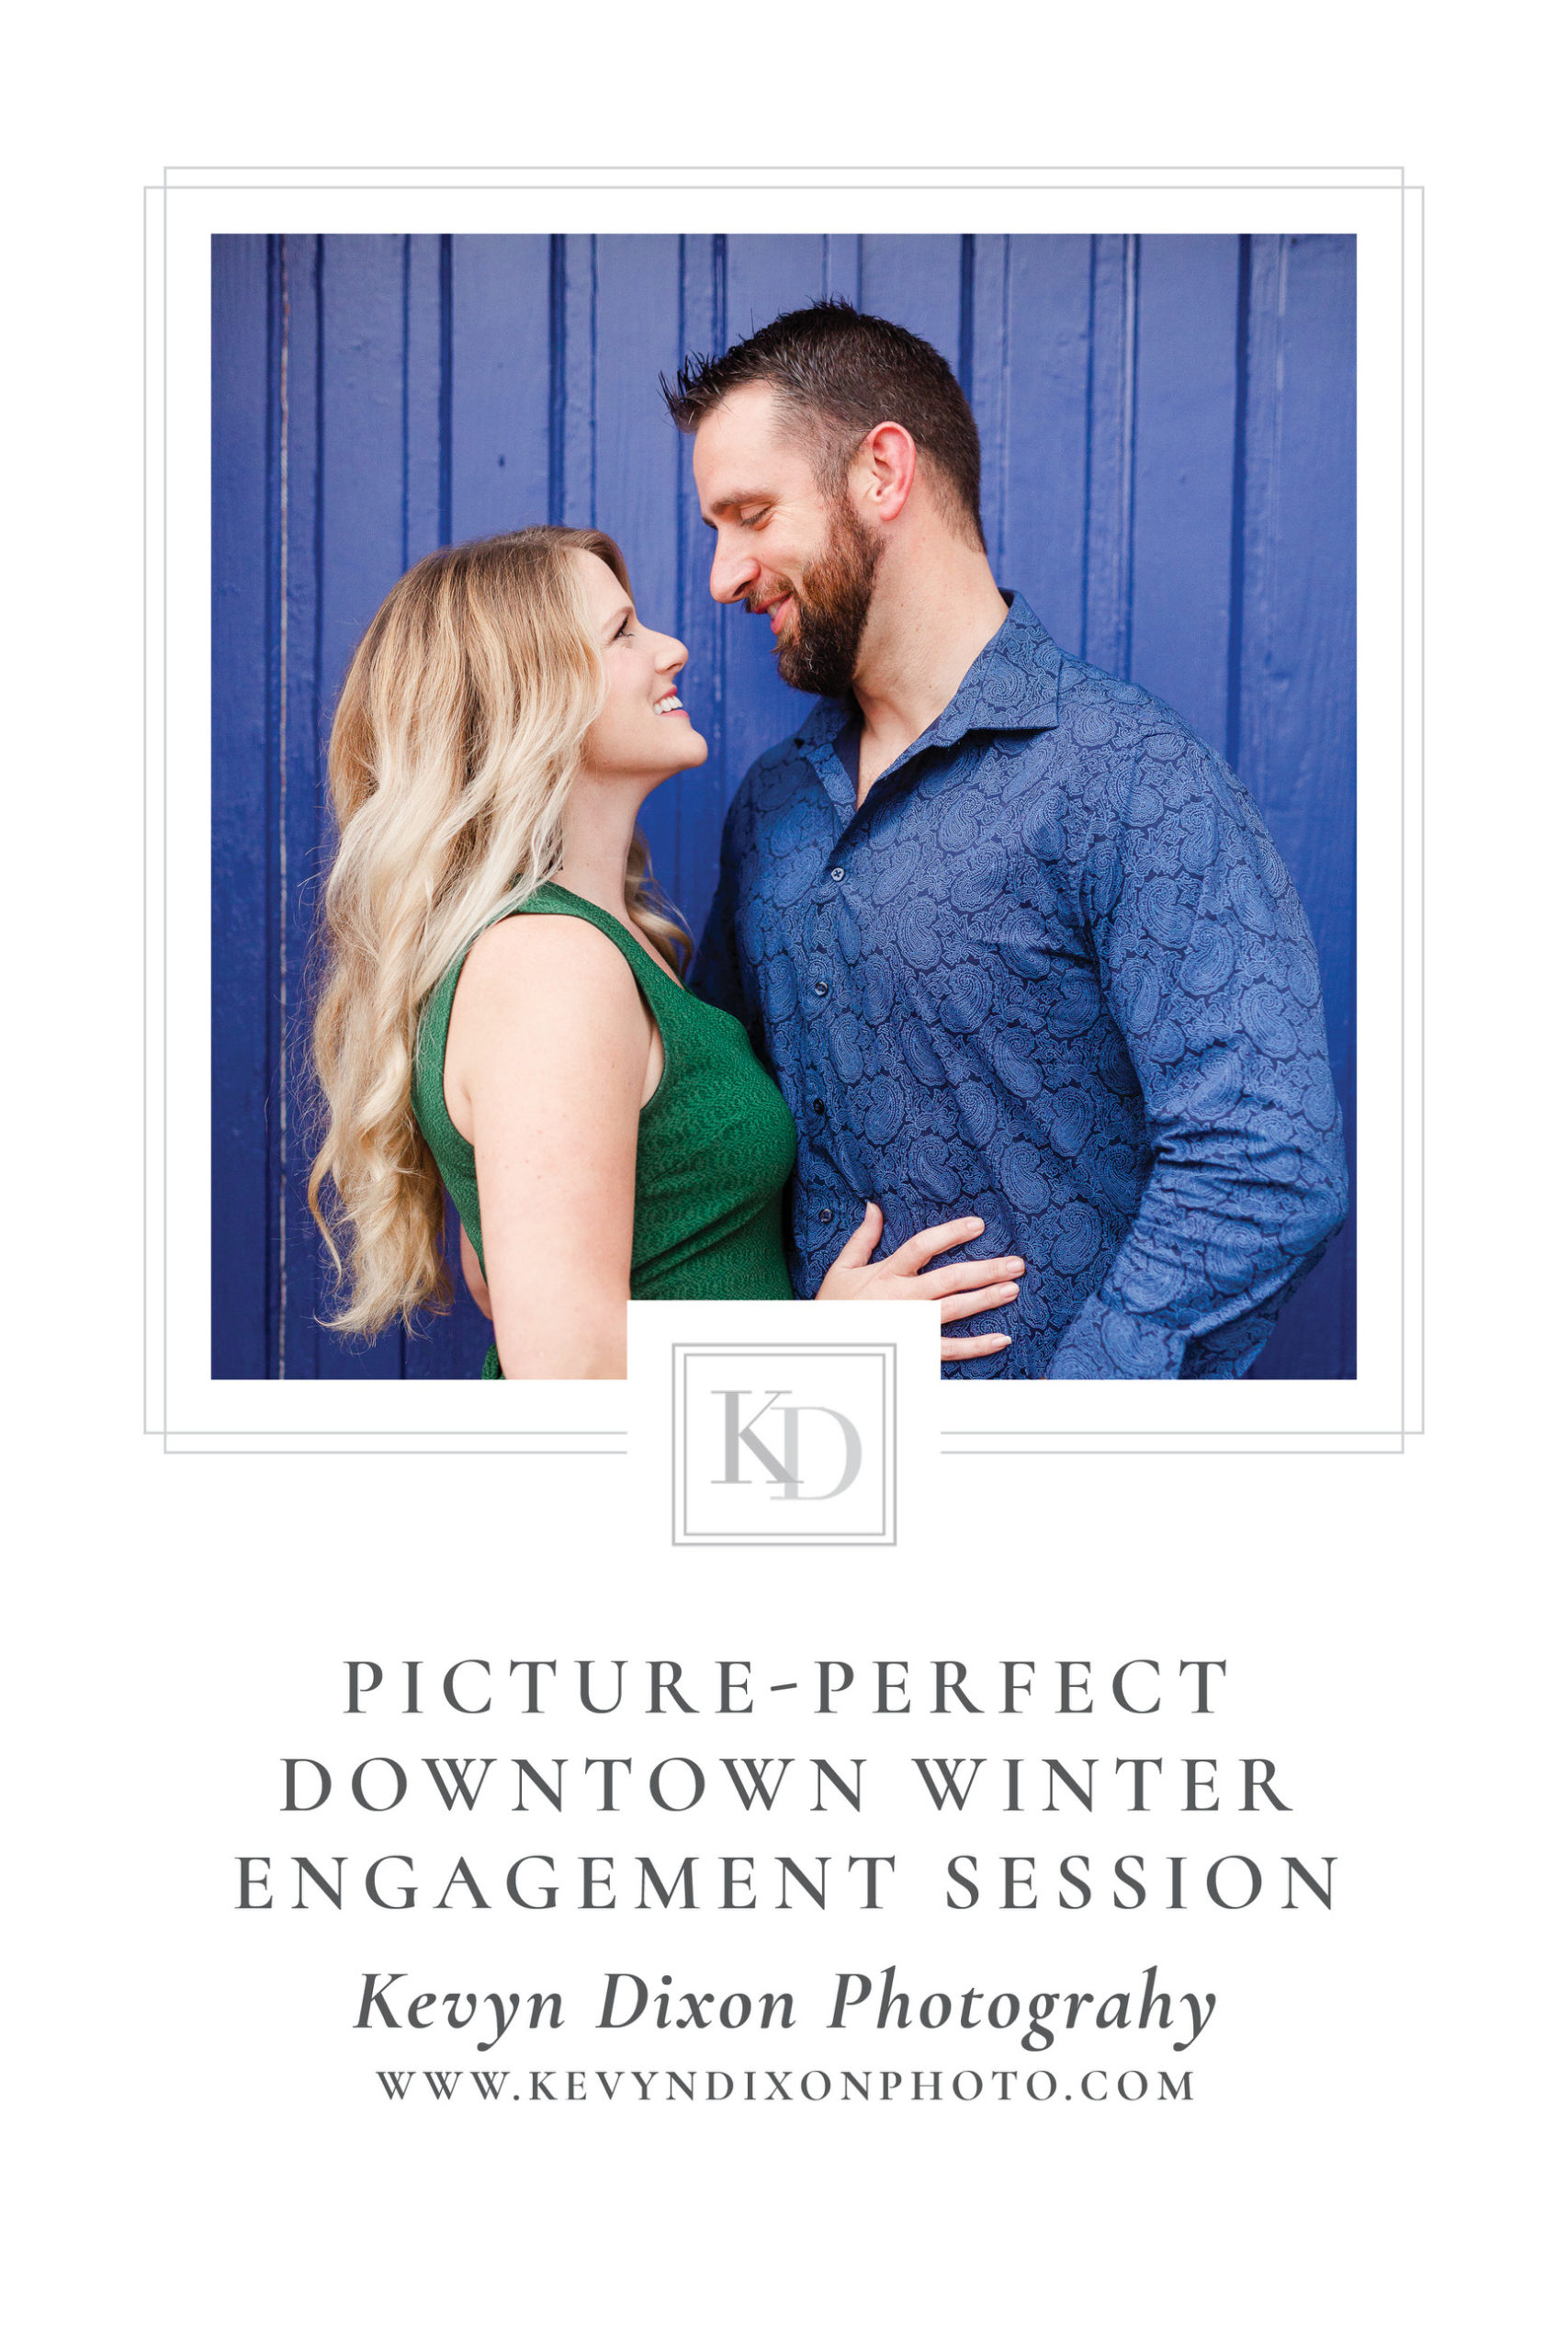 Pin Image for Downtown Waxhaw, NC Engagement Session